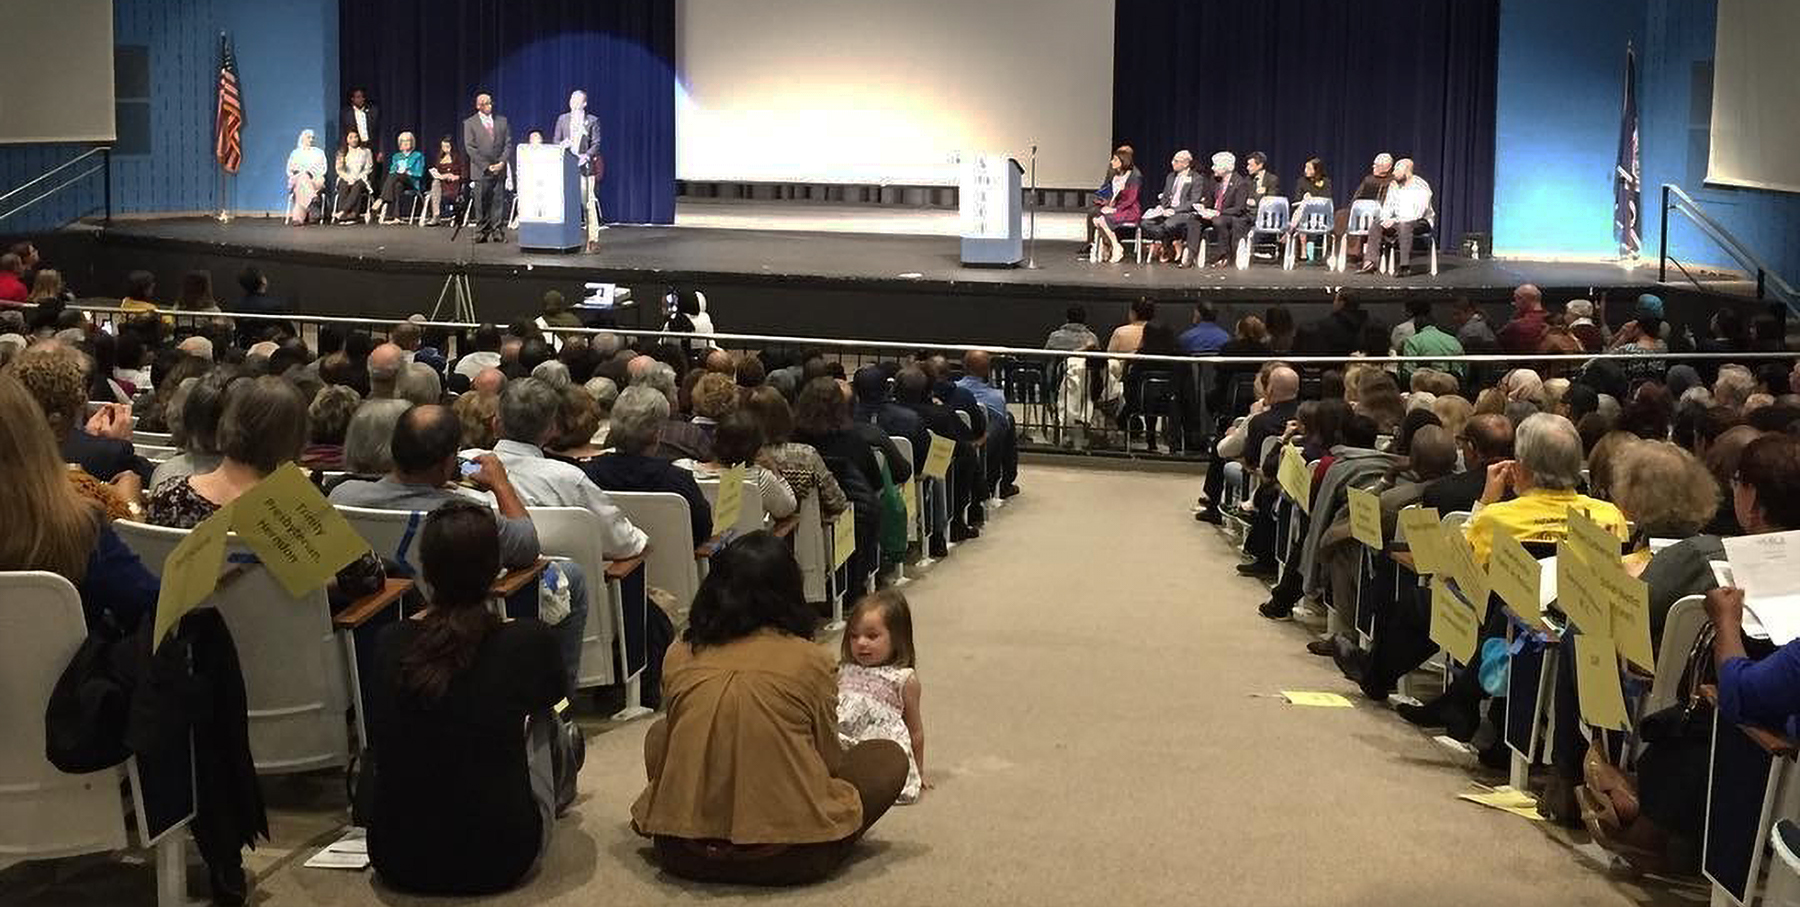 More than 1,300 people gathered in Virginia on Sunday to hear State Attorney General Mark Herring call for reforms to the state’s cash bail system. The event was sponsored by Virginians Organized for Interfaith Community Engagement (VOICE).